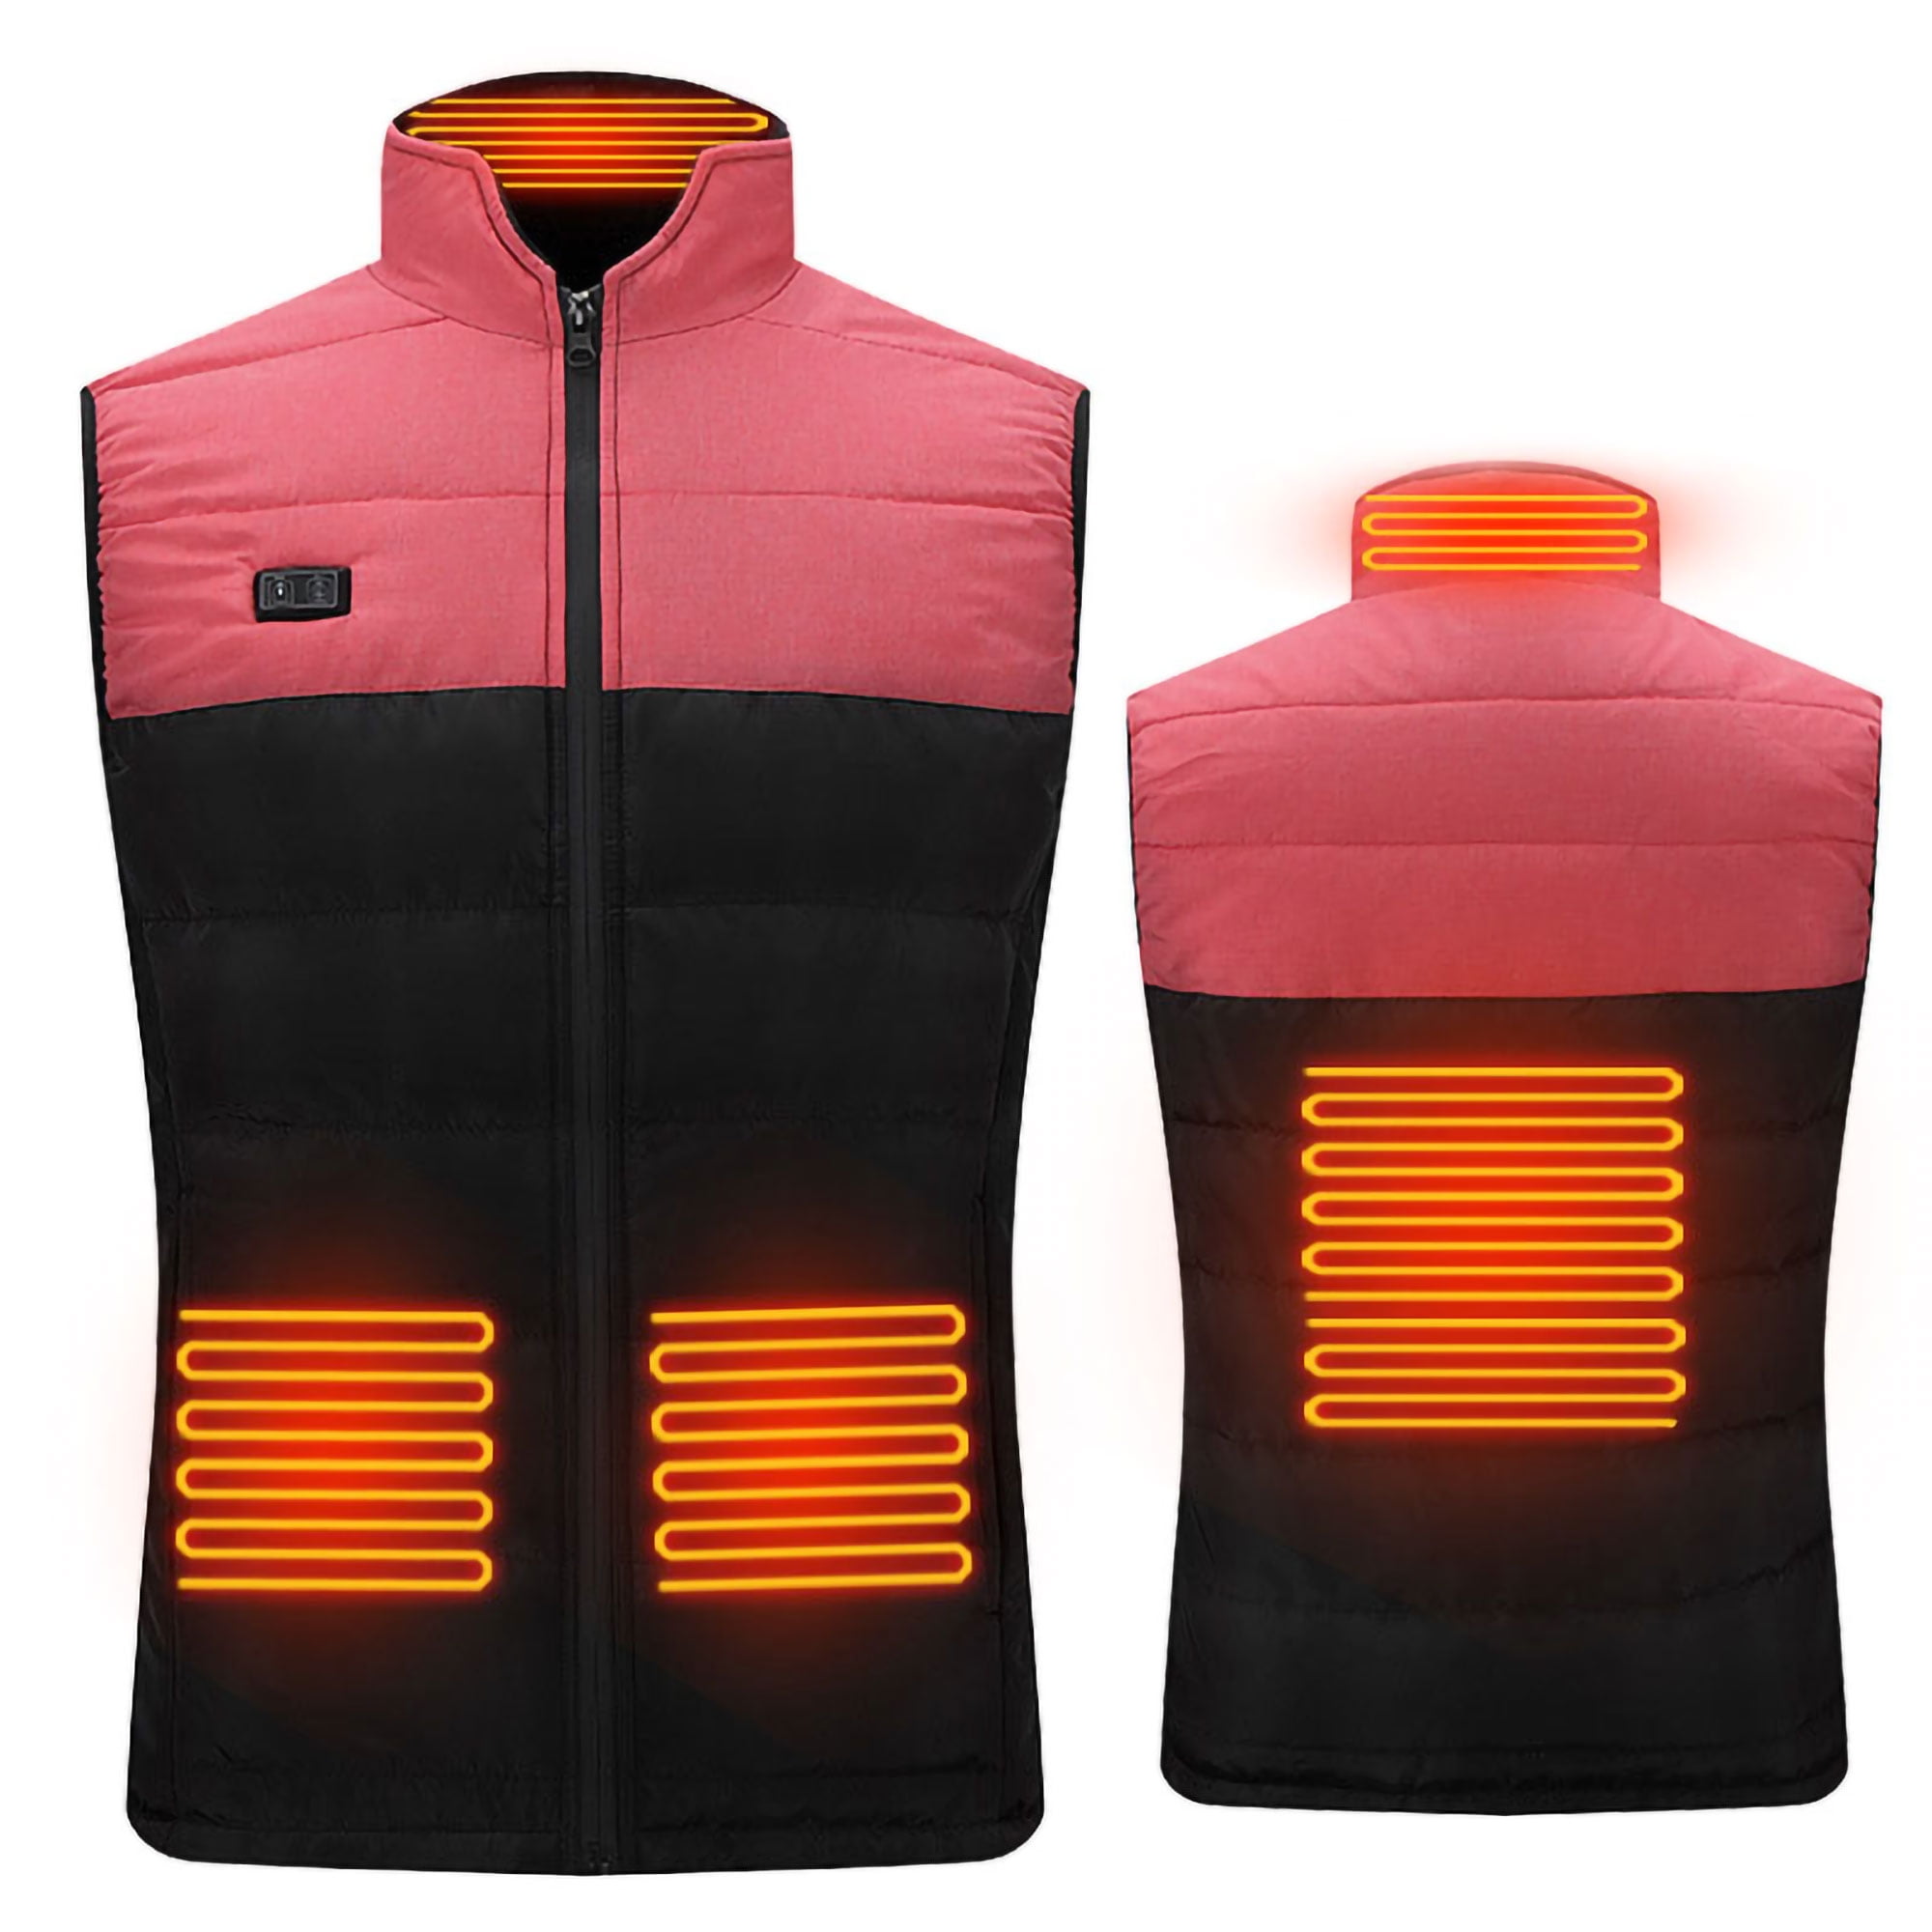 Red USB Heating Vest Heated Coat Winter Warm Vest For Motorcycle Bicycle Hiking Skiing Camping Fishing Climbing Thermo Jacket USB Electric Heated Vest Jacket Clothing 